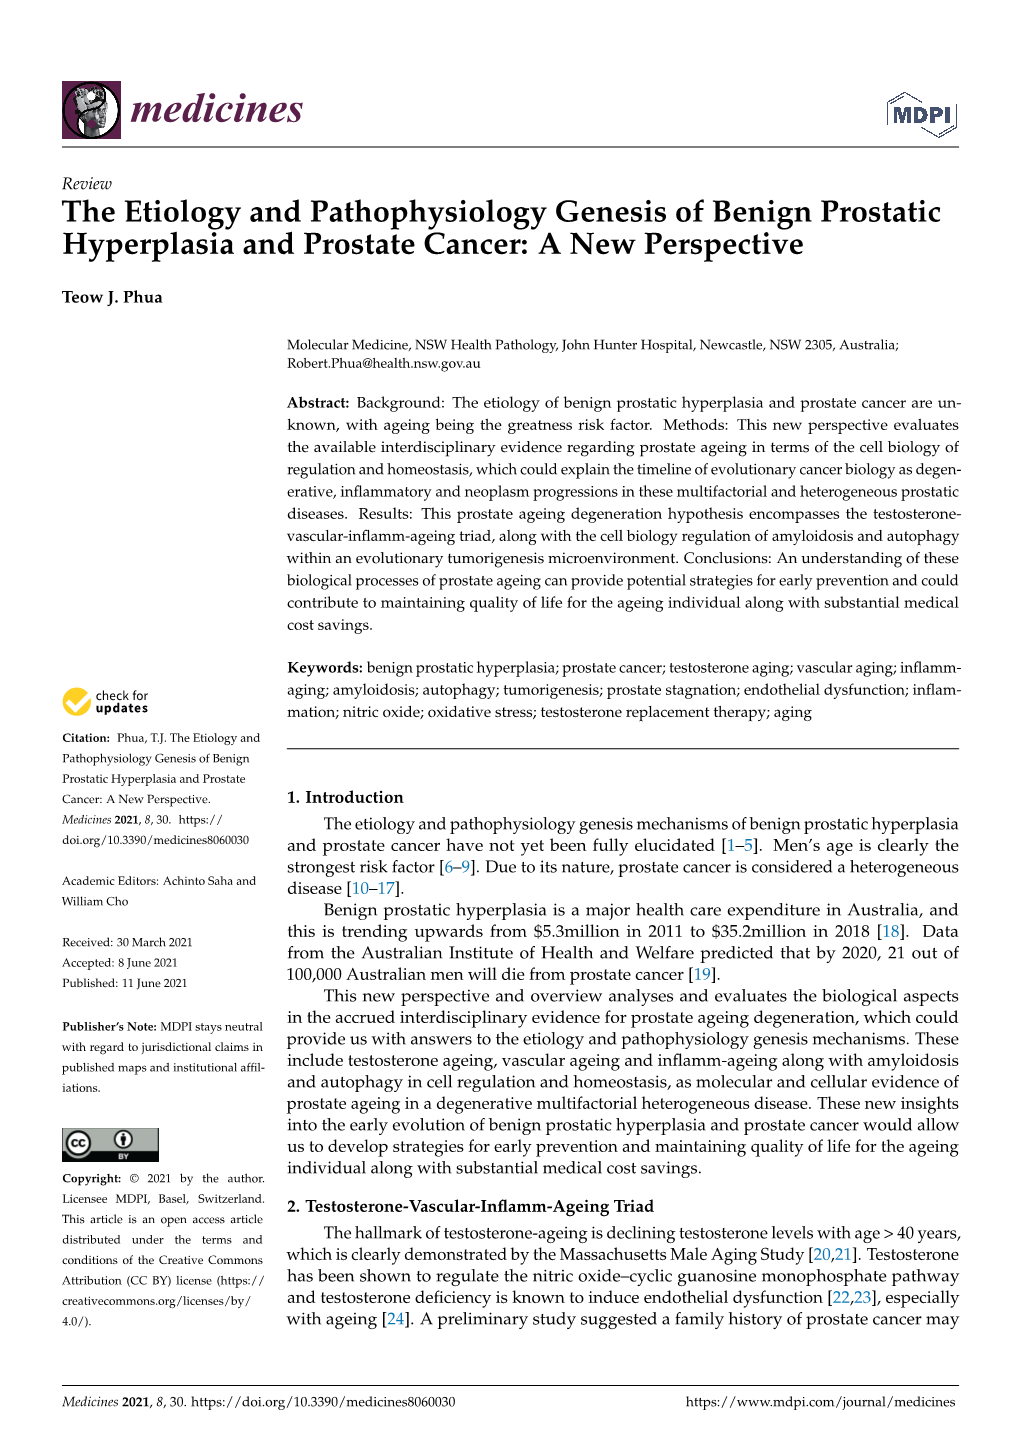 The Etiology and Pathophysiology Genesis of Benign Prostatic Hyperplasia and Prostate Cancer: a New Perspective